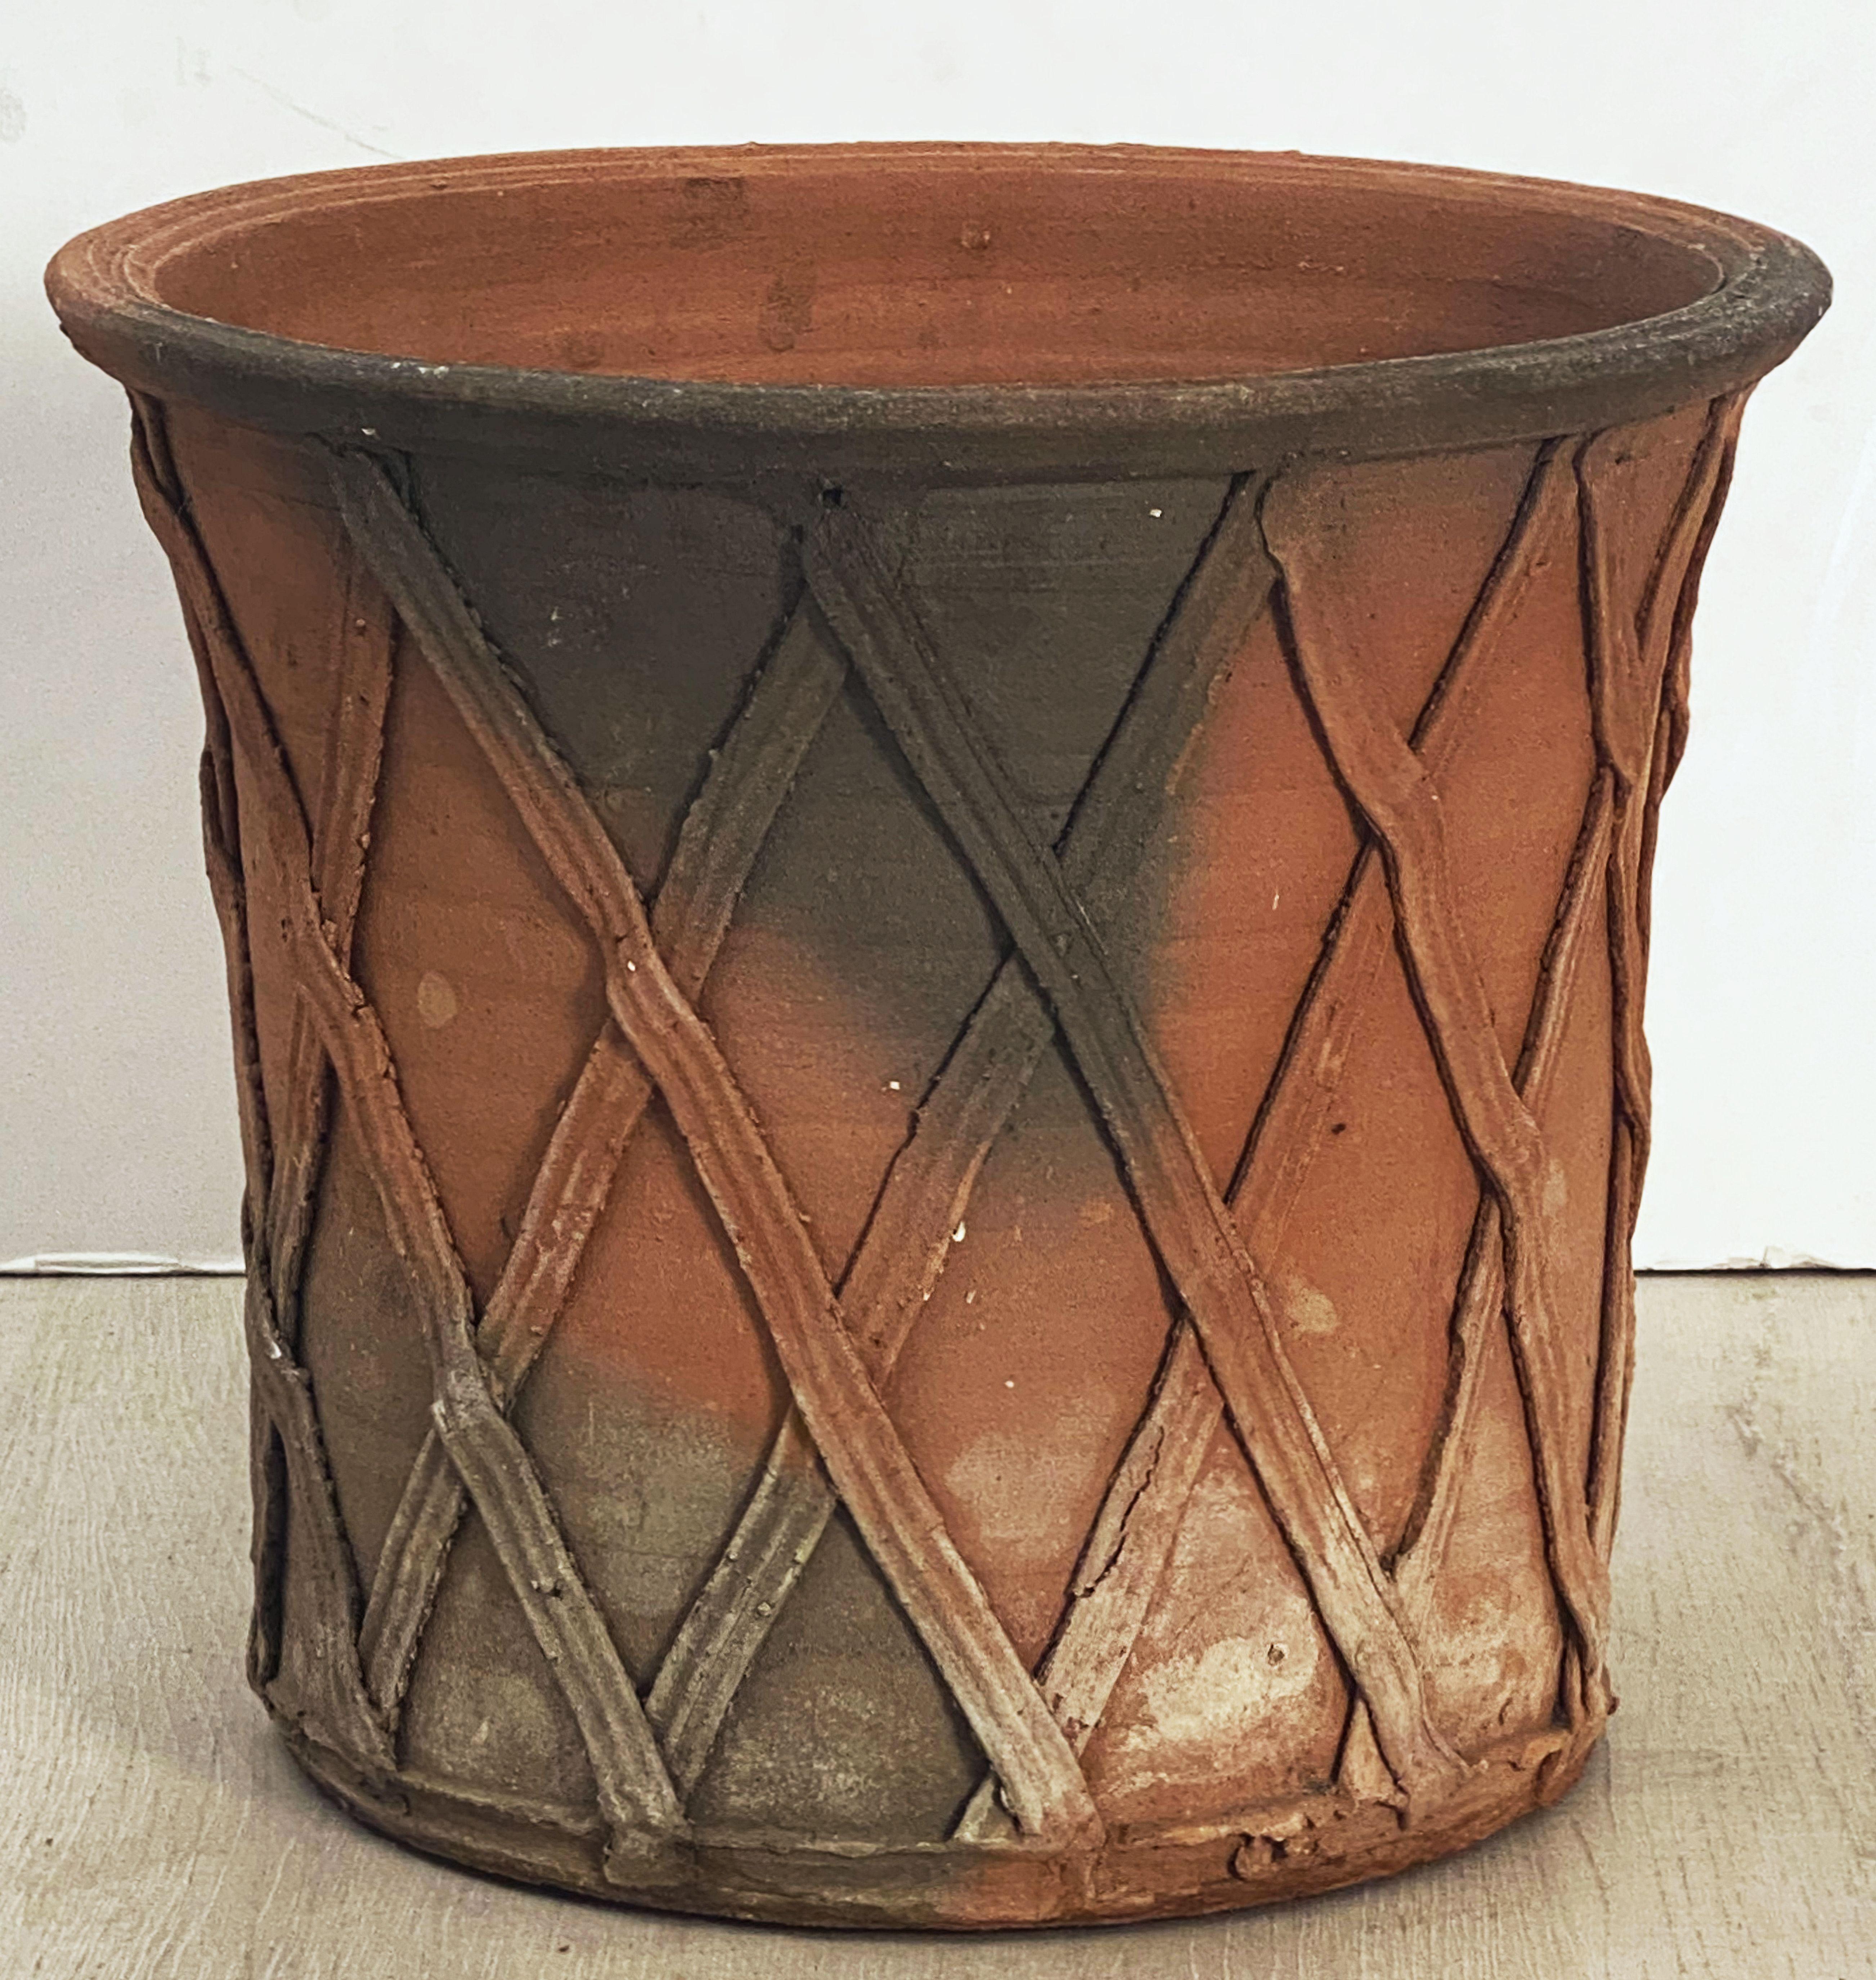 A fine large English round garden planter of terracotta, 14 3/4 inches in diameter, featuring a stylized lattice or strapwork raised relief around the circumference and a rolled edge to the rim.

Dimensions: Height 12 3/4 inches x Diameter 14 3/4